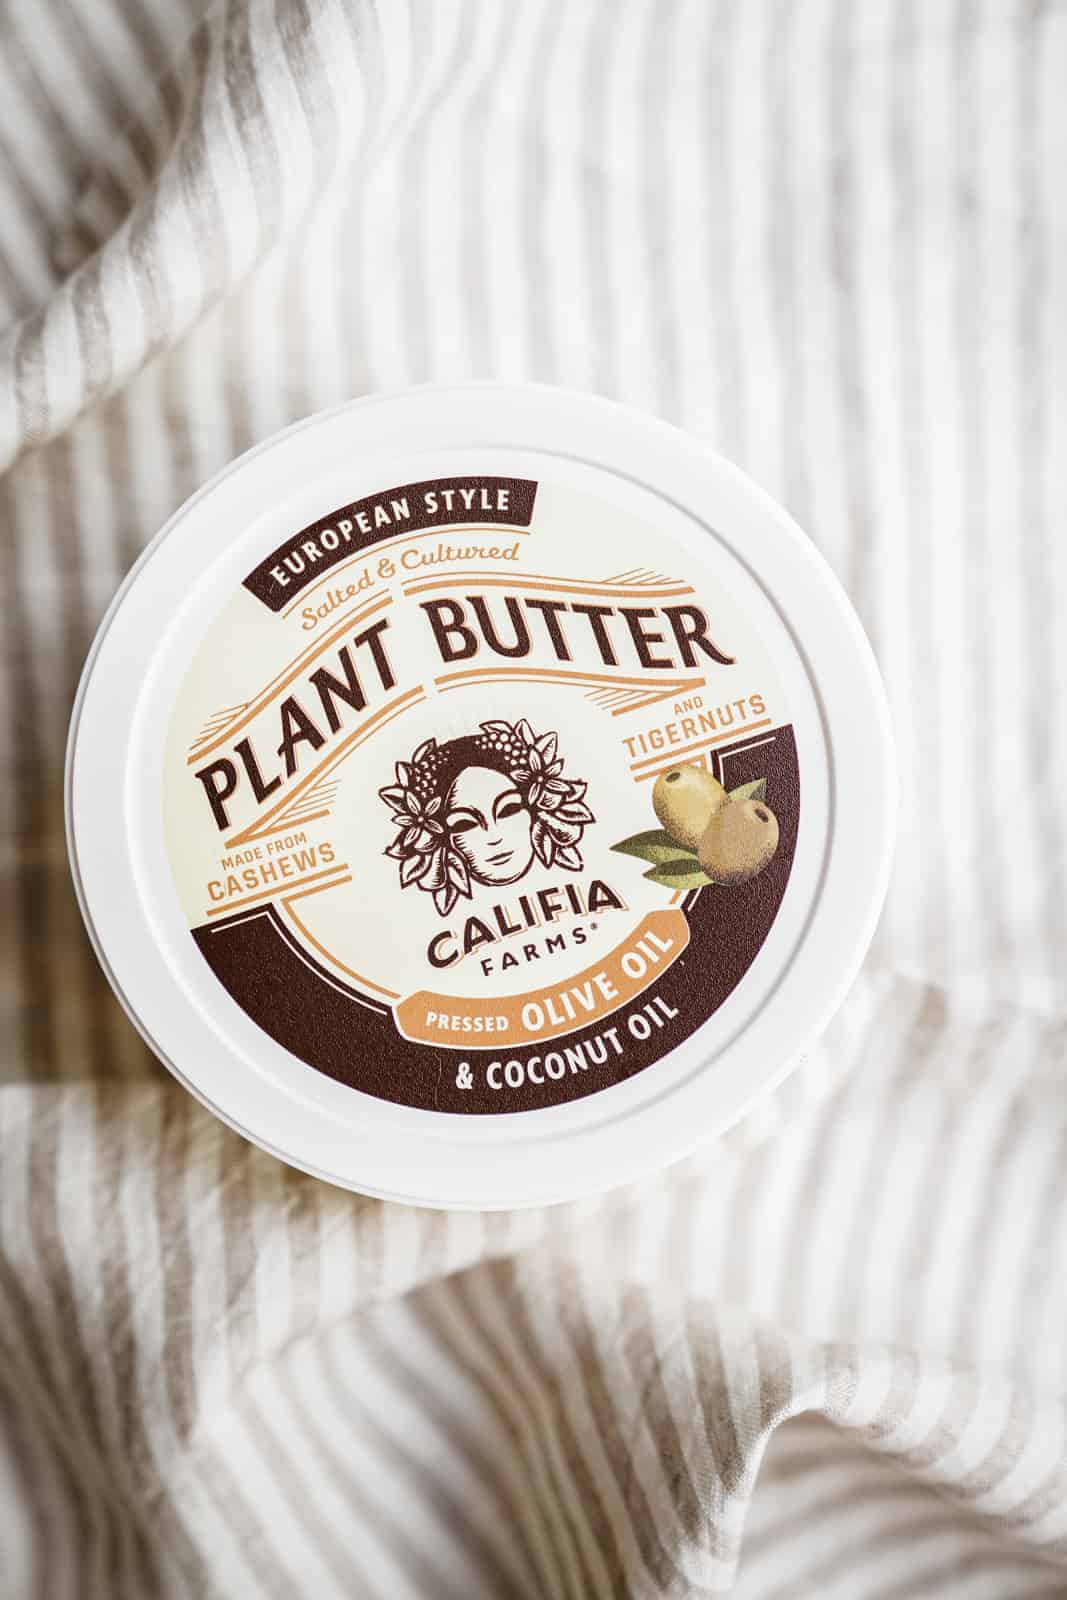 Container of Califia Farms Plant Butter made with Olive Oil on cloth